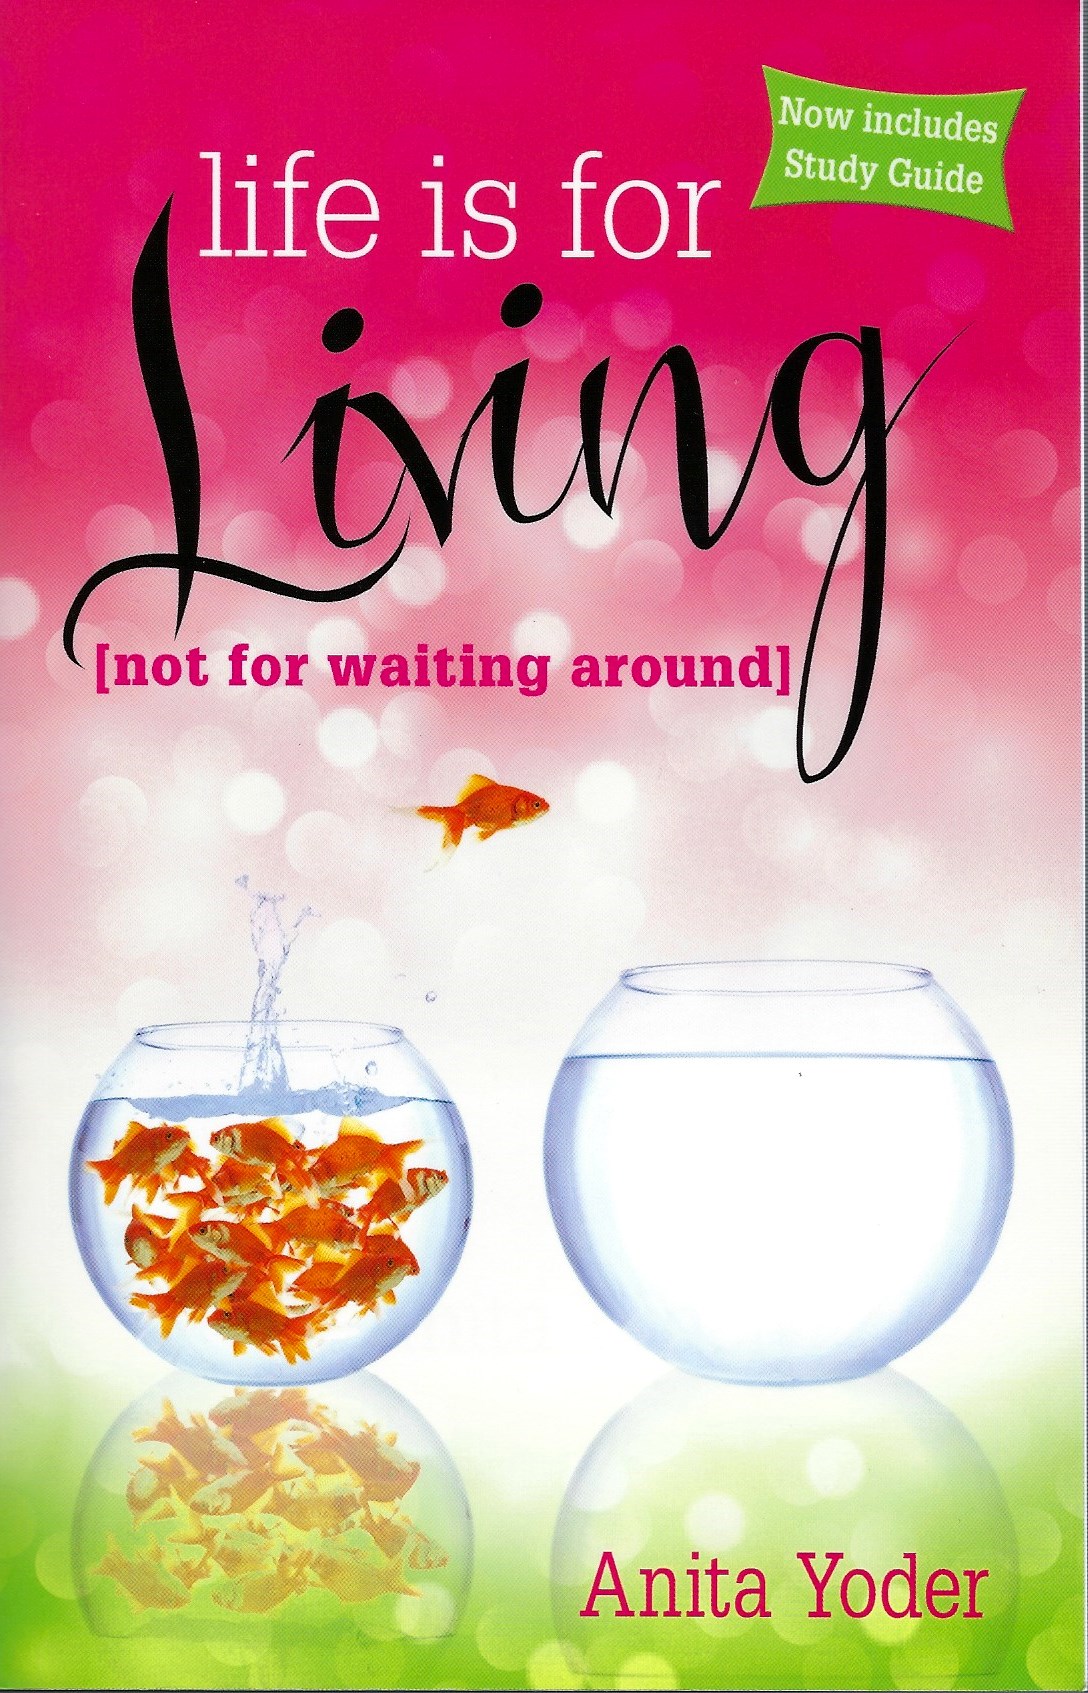 LIFE IS FOR LIVING (NOT FOR WAITING AROUND) Anita Yoder